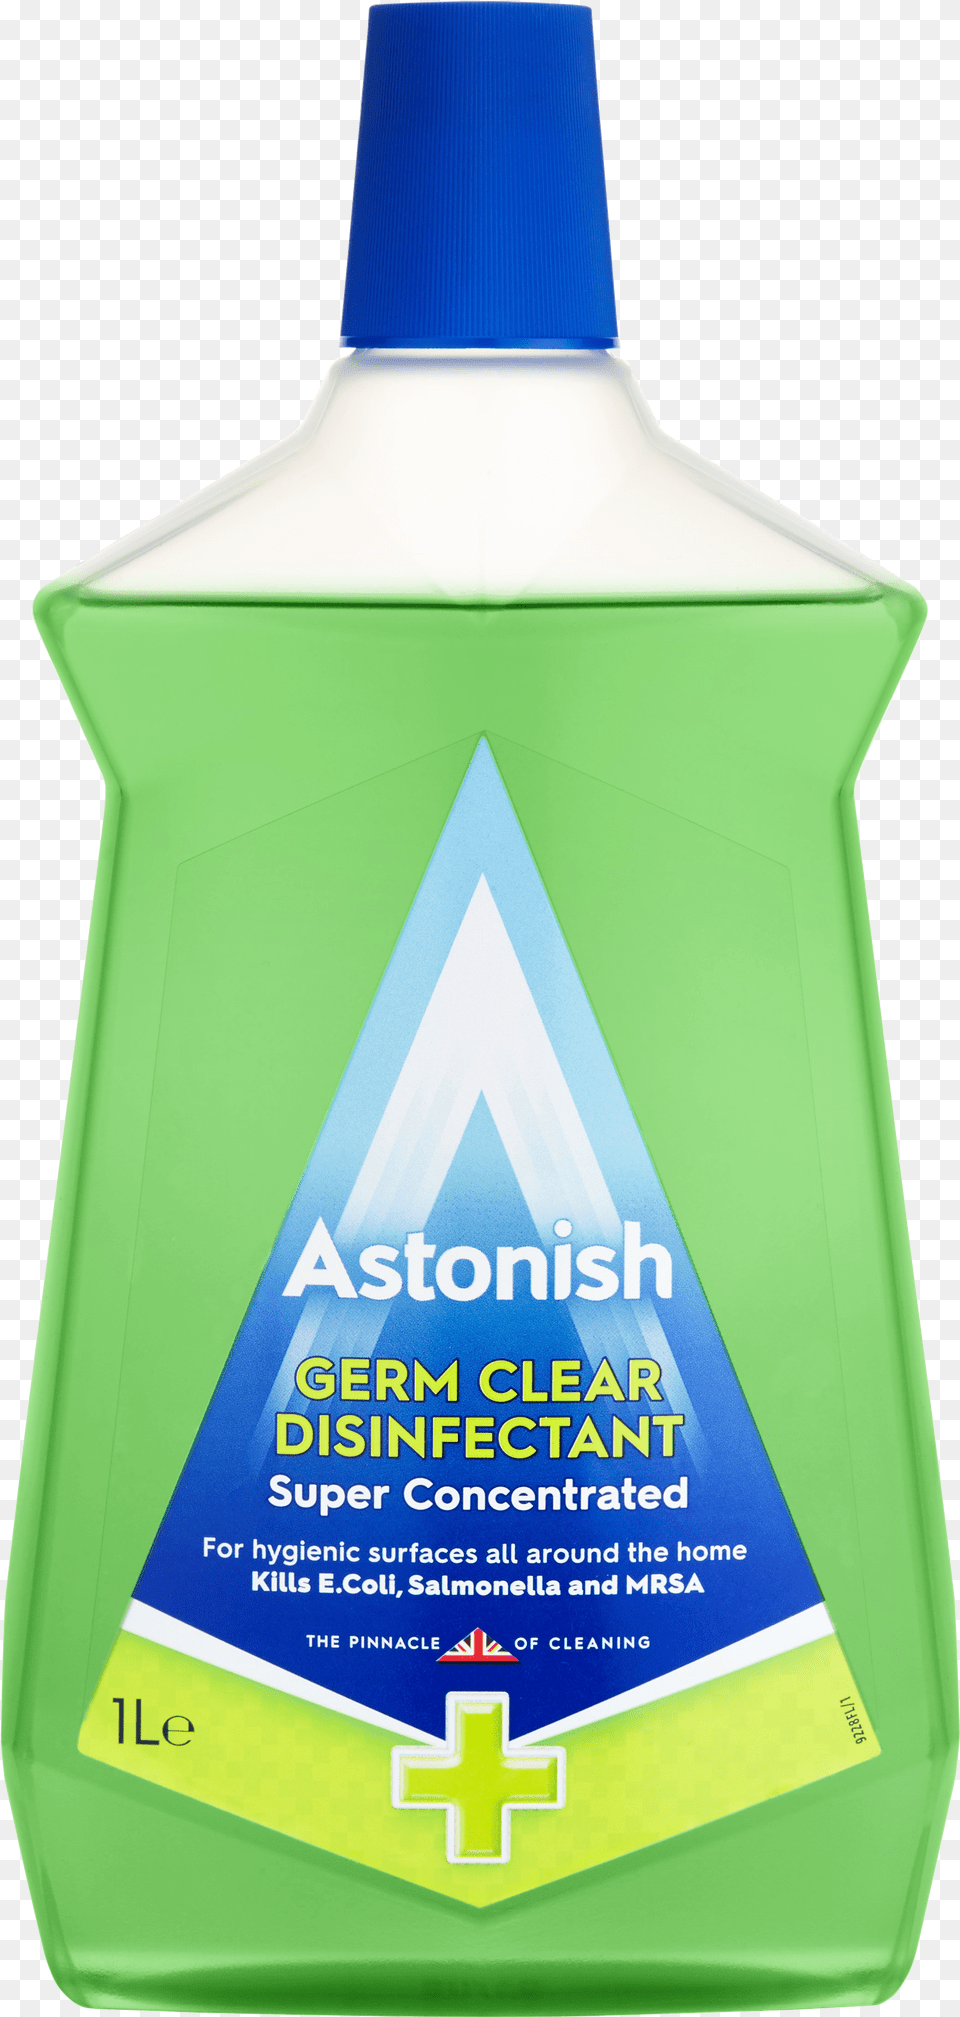 Astonish Germ Clear Disinfectant Free Png